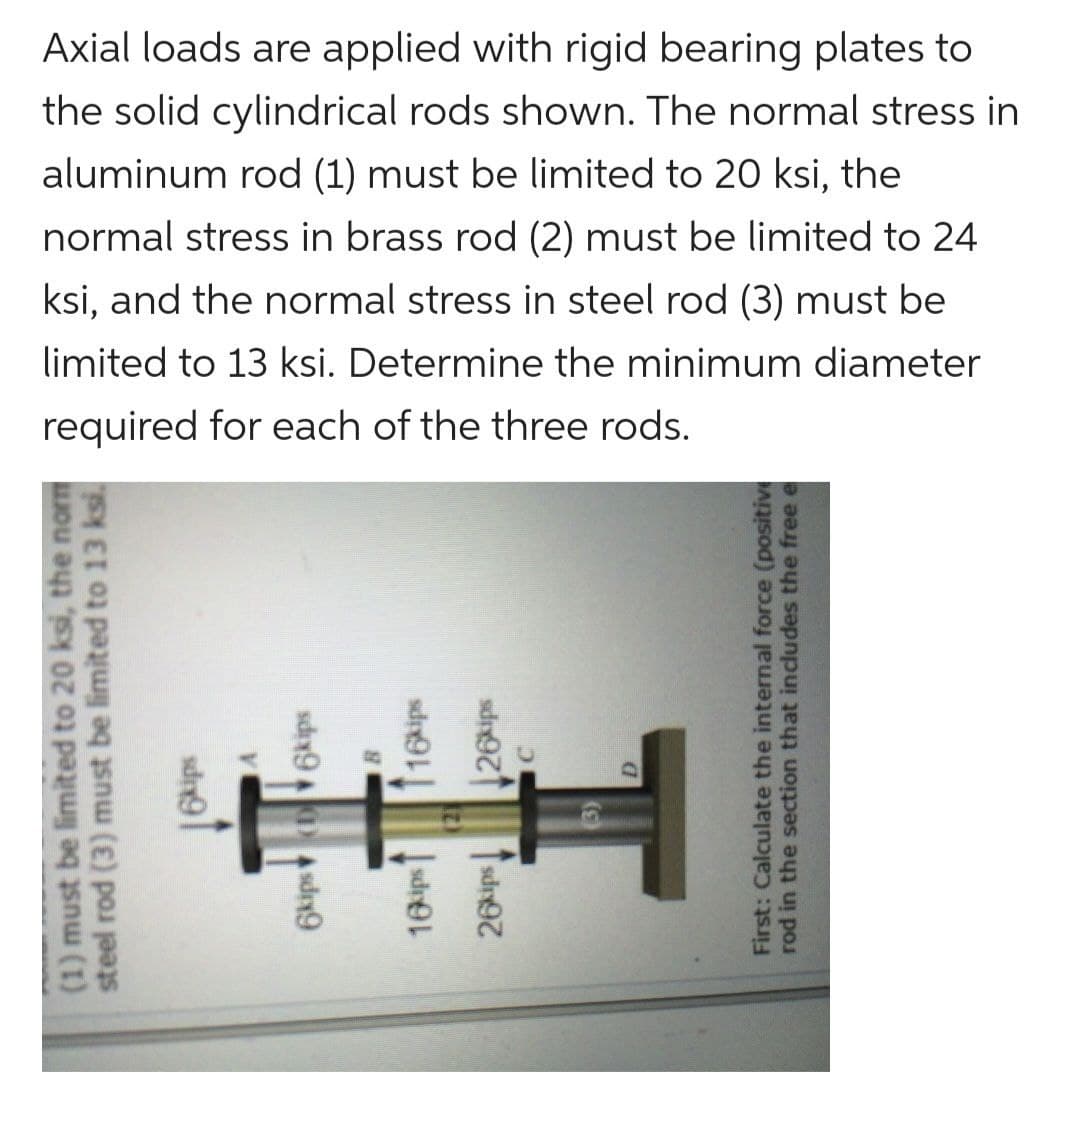 Axial loads are applied with rigid bearing plates to
the solid cylindrical rods shown. The normal stress in
aluminum rod (1) must be limited to 20 ksi, the
normal stress in brass rod (2) must be limited to 24
ksi, and the normal stress in steel rod (3) must be
limited to 13 ksi. Determine the minimum diameter
required for each of the three rods.
(1) must be limited to 20 ksi, the norm
steel rod (3) must be limited to 13 ksi.
First: Calculate the internal force (positive
rod in the section that includes the free e